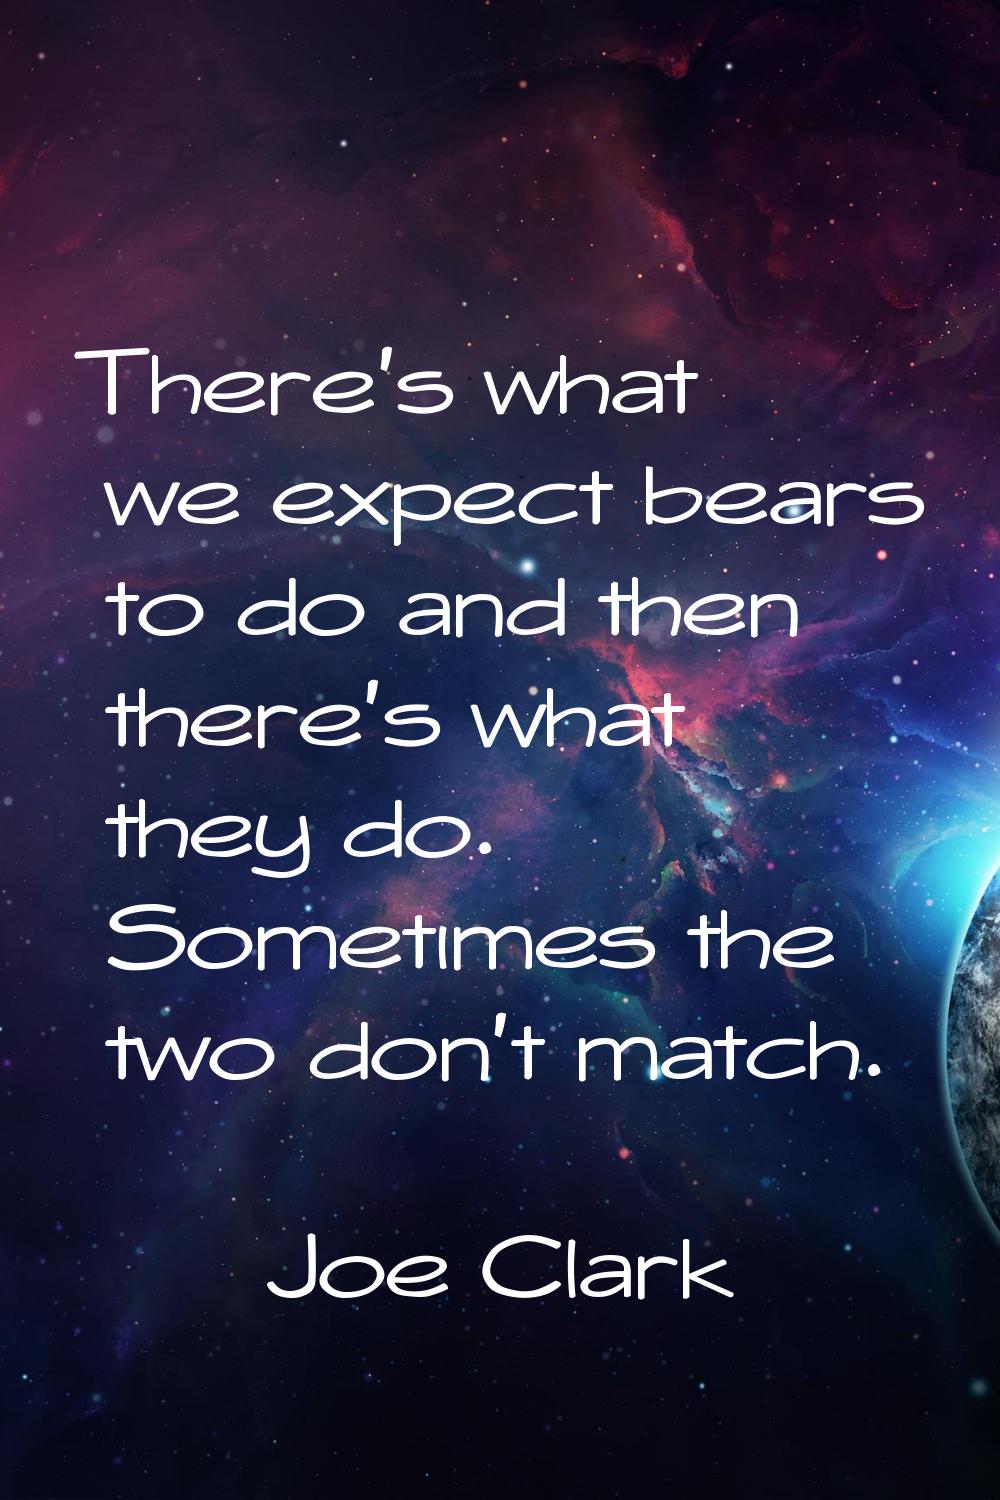 There's what we expect bears to do and then there's what they do. Sometimes the two don't match.